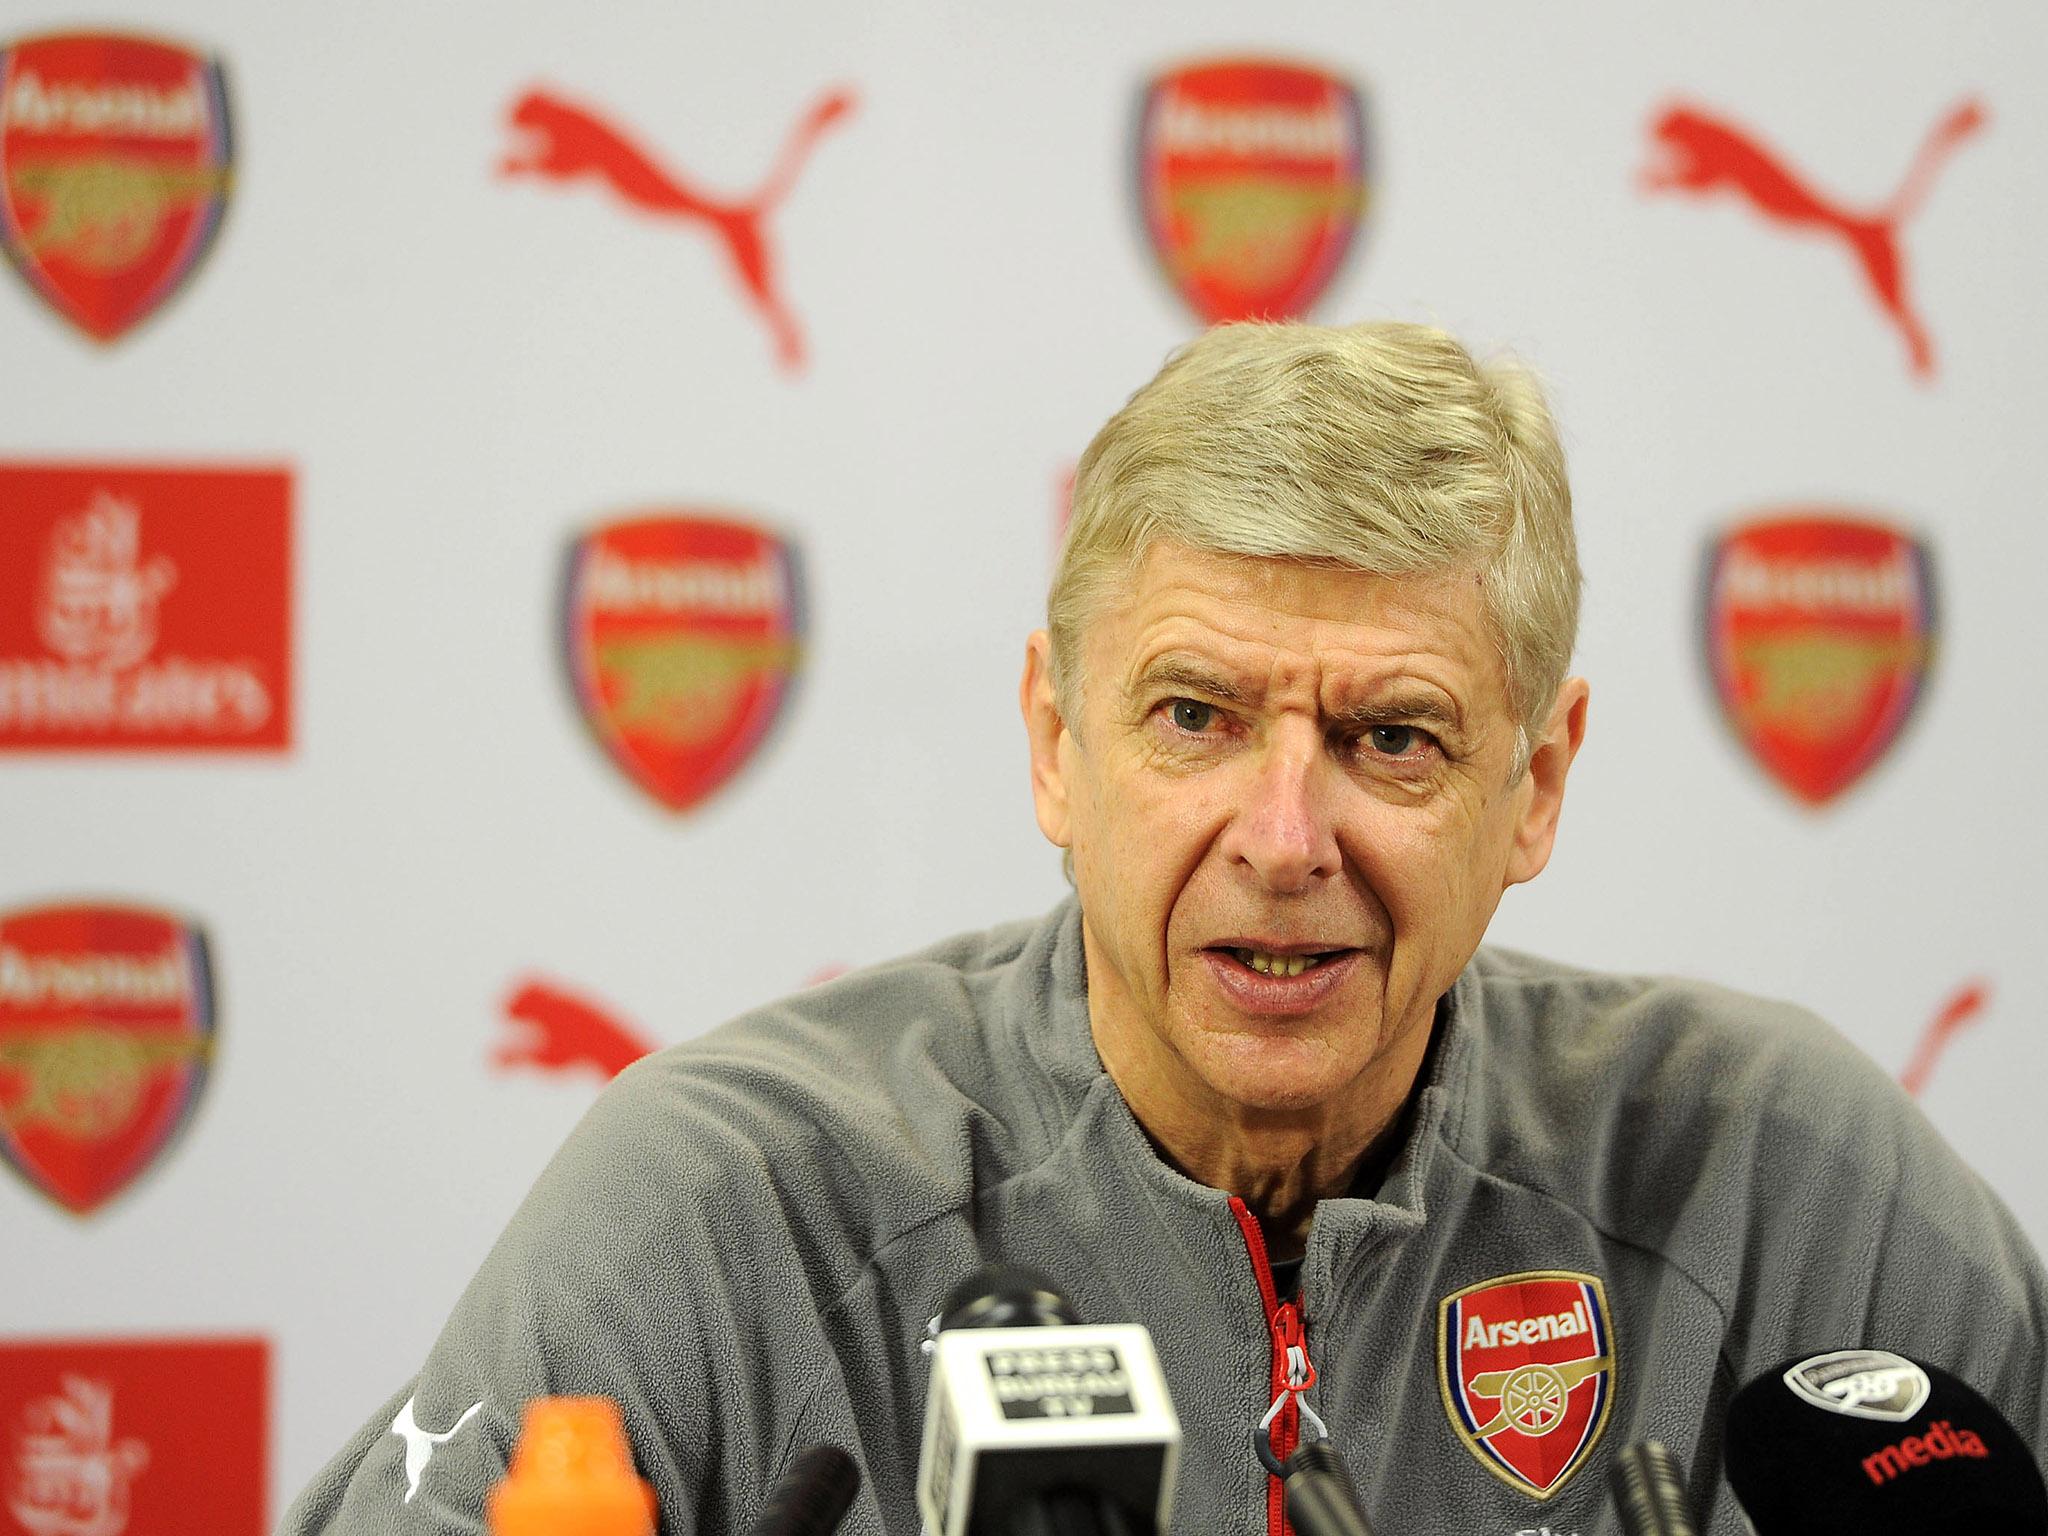 Wenger was speaking at a press conference when he made the remarks